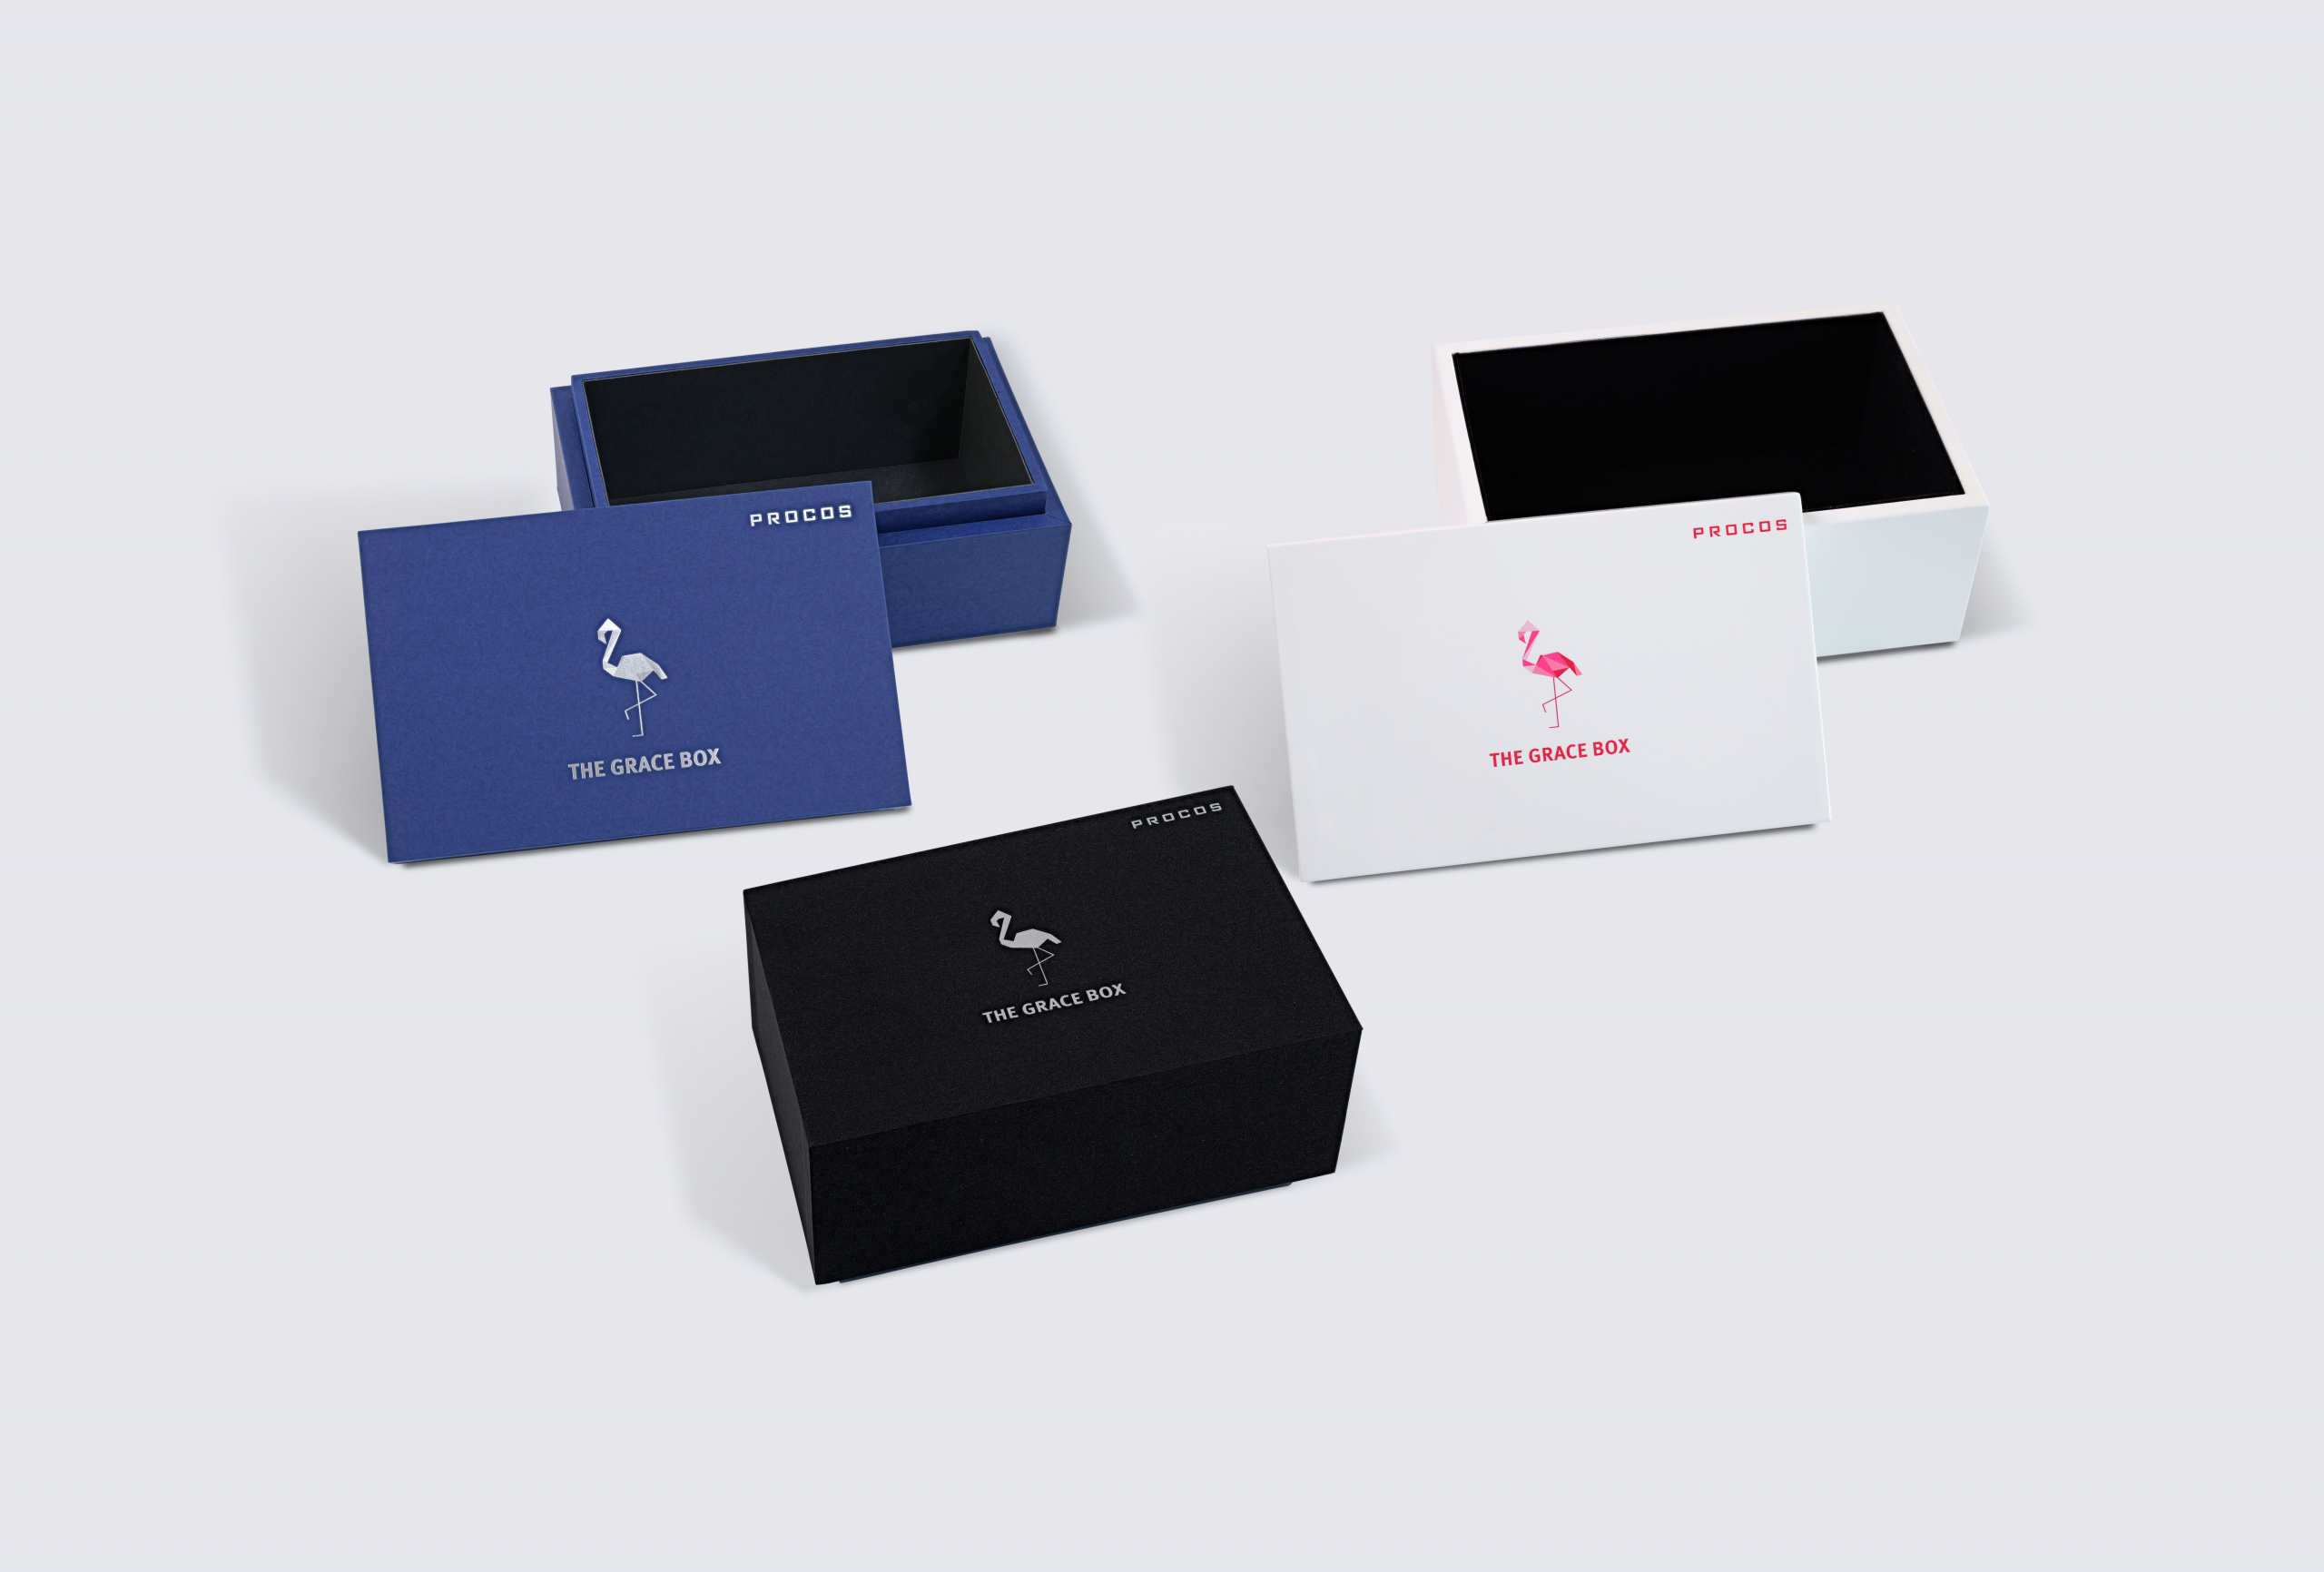 PROCOS presents the „GRACE BOX“ at Luxe Pack Monaco. An elegant, refined and eco-responsible box